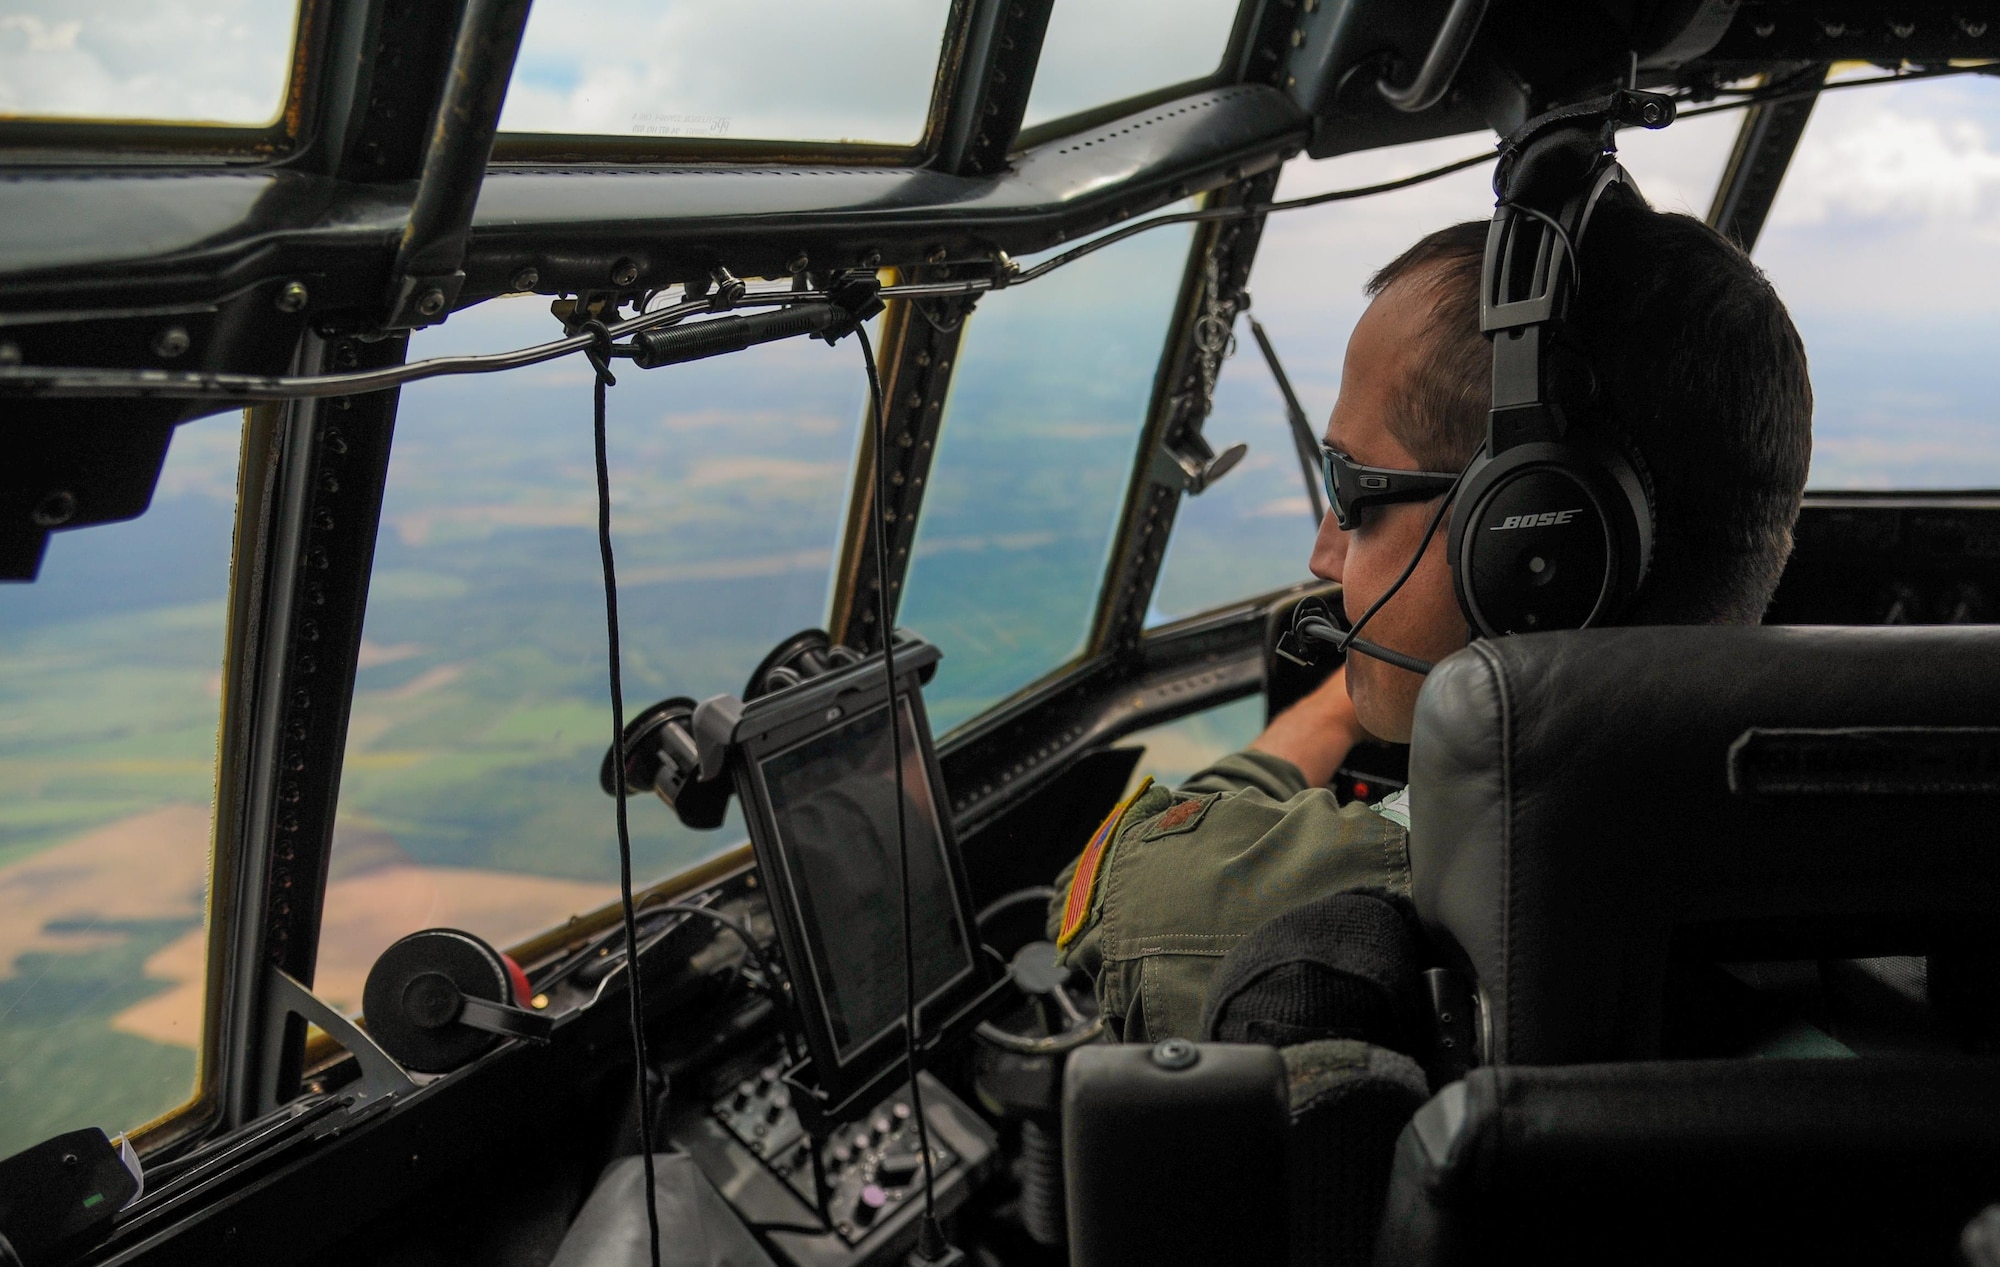 U.S. Air Force Reserve Maj. Chris Clinton, a 731st Airlift Squadron C-130 Hercules pilot out of Peterson Air Force Base, Colorado Springs, Colo., prepares for landing at Papa Air Base, Hungary, as part of exercise Swift Response 17, July 15, 2017. Swift Response is linked to exercise Saber Guardian 17, a U.S. Army Europe-led, multinational exercise that spans across Bulgaria, Hungary and Romania with more than 25,000 service members from 22 allied and partner nations. (U.S. Air Force photo/Maj. Jolene Bottor-Ortiona)